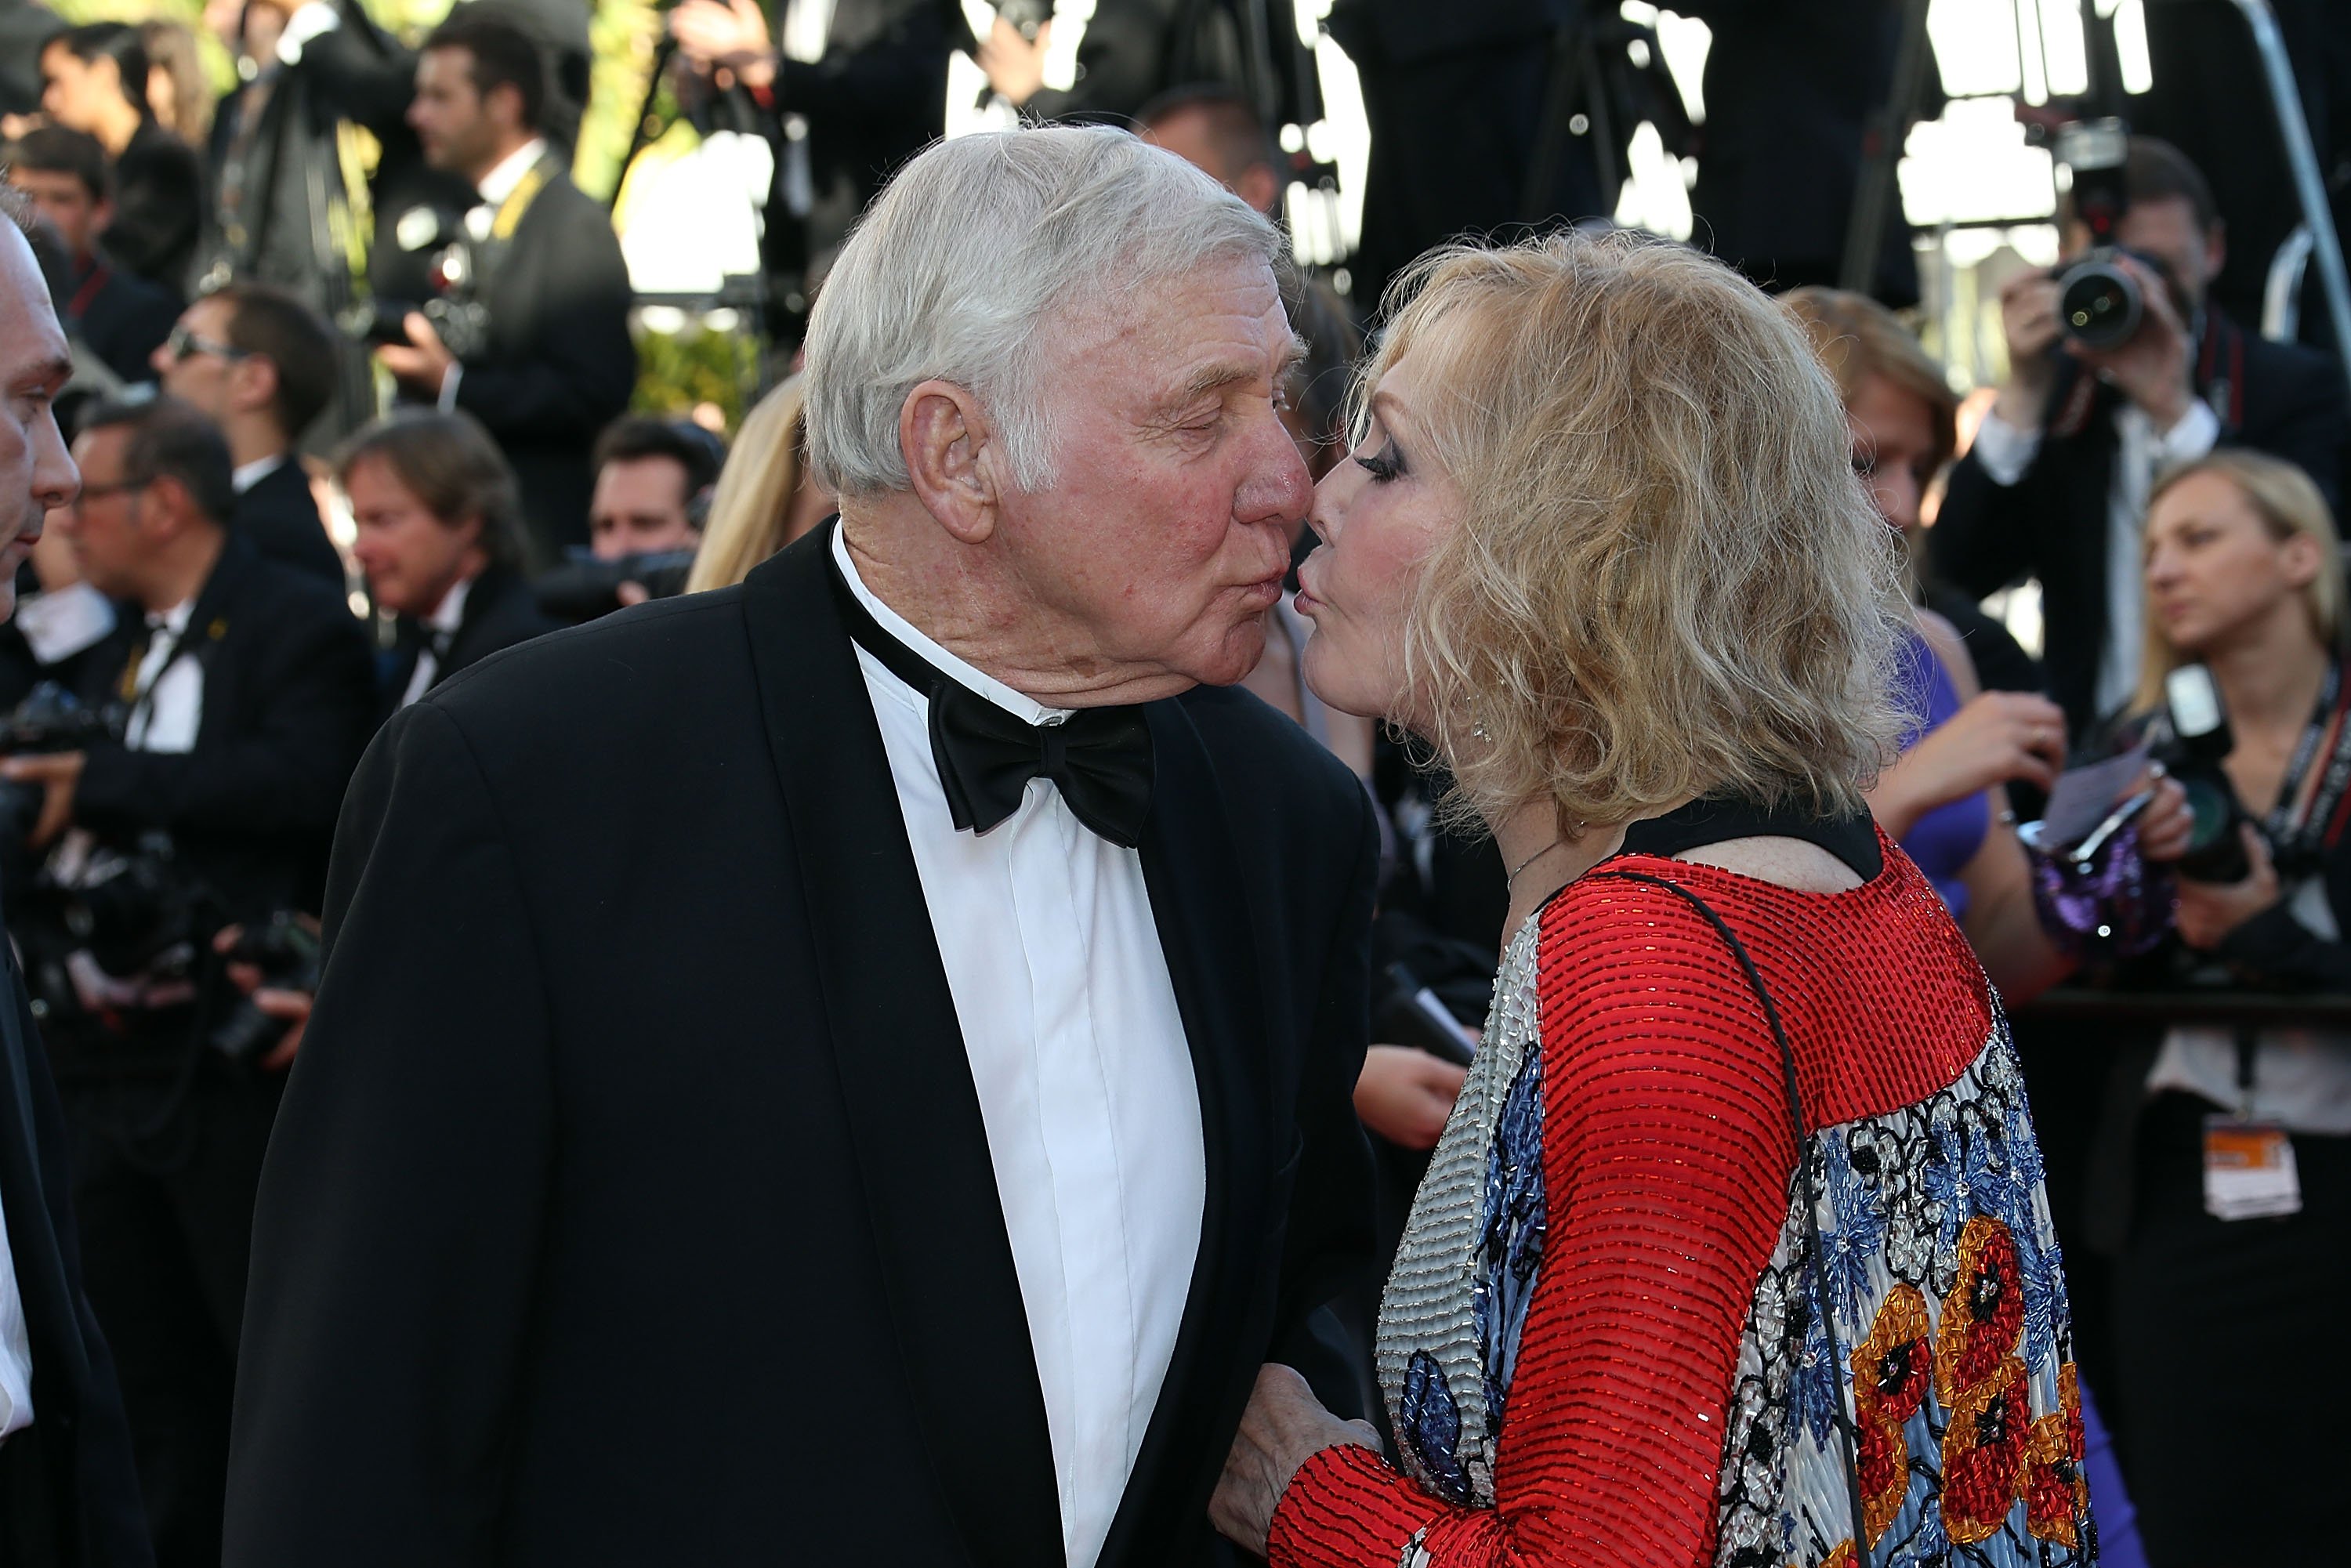 Robert Malloy and Kim Novak attend the "Zulu" Premiere and Closing Ceremony during the 66th Annual Cannes Film Festival at the Palais des Festival on May 26, 2013 in Cannes, France ┃Source: Getty Images